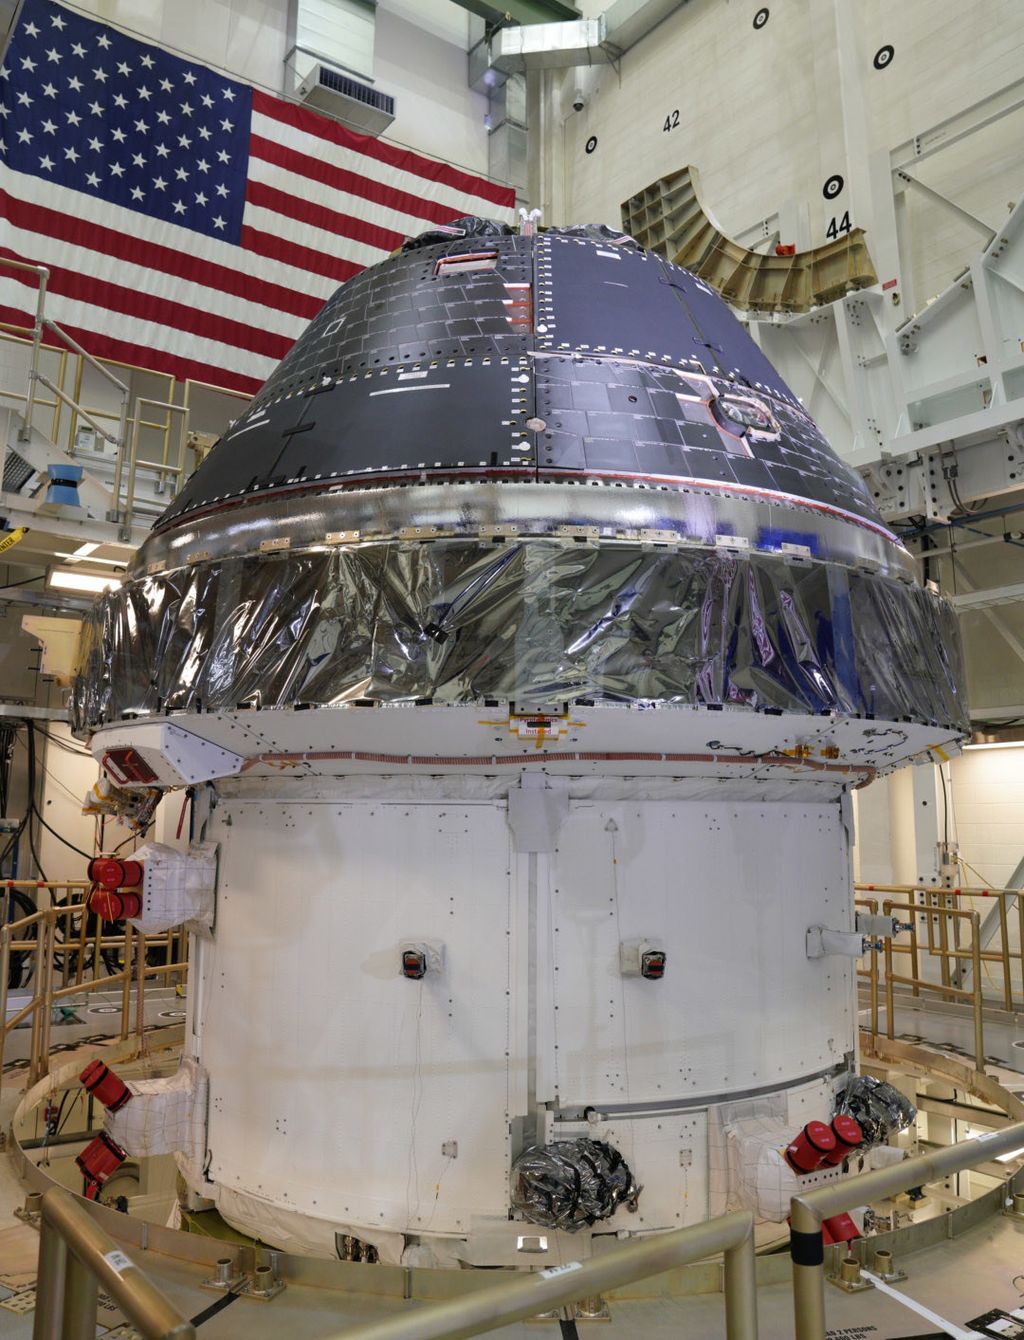 The Orion Spacecraft for NASA's 2020 Trip Around the Moon Is Ready to Go (Photo)